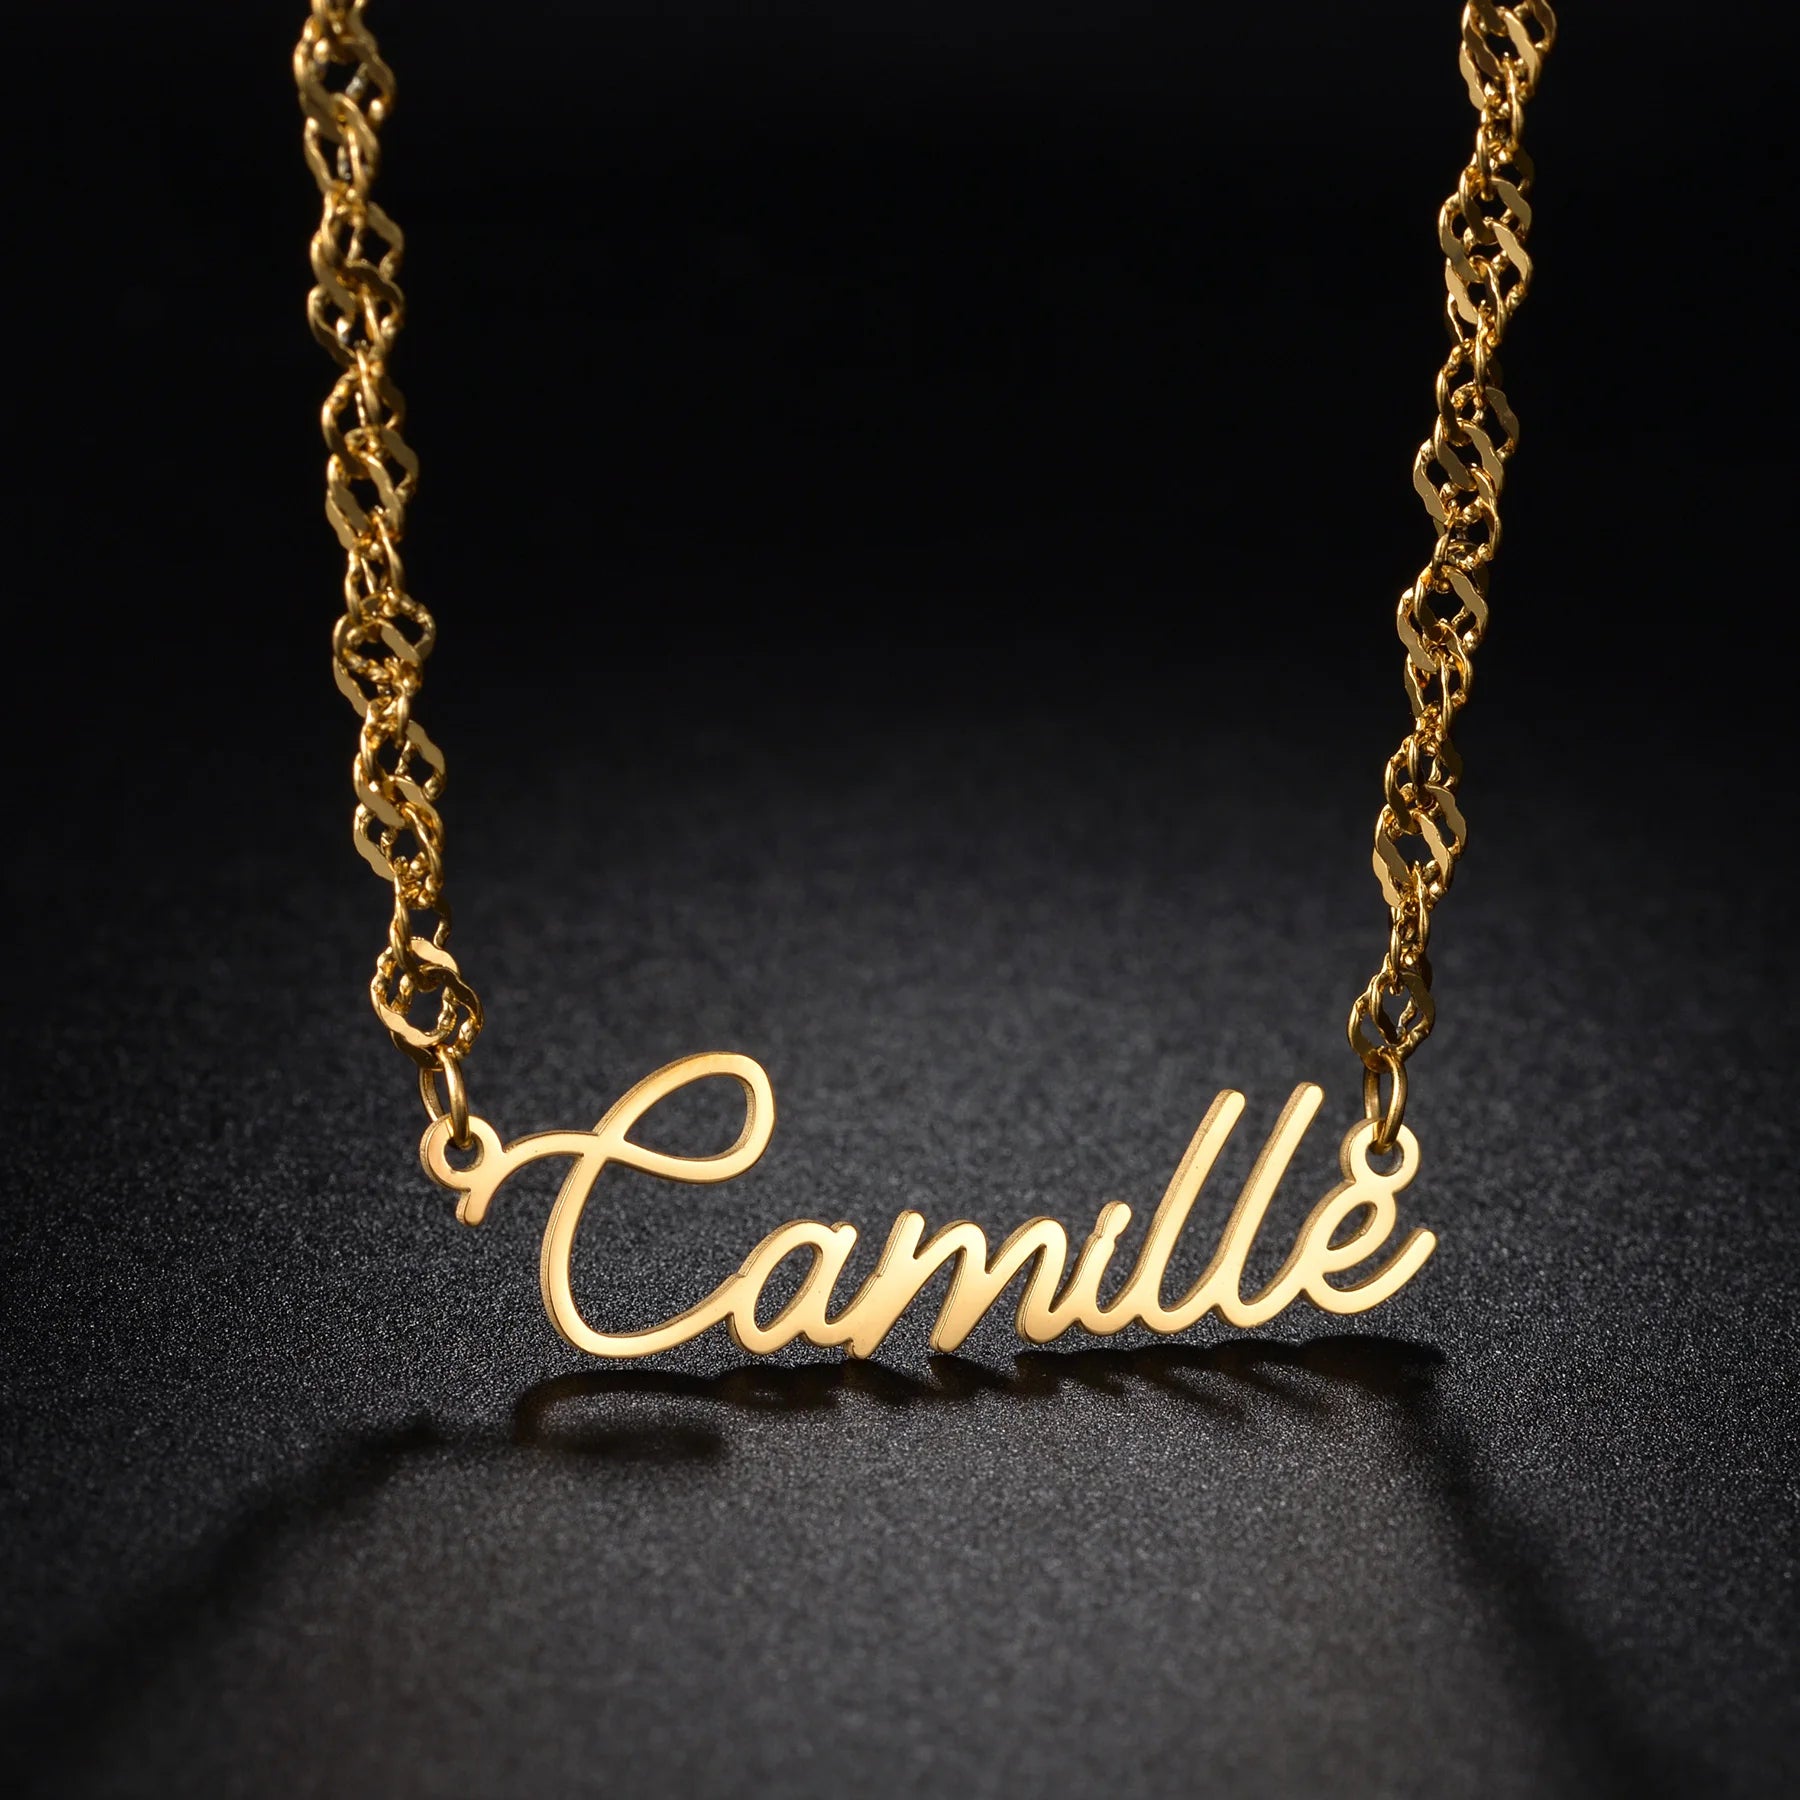 Personalized Custom Name Necklace for Women - Stainless Steel Wave Chain with Letter Nameplate Pendant